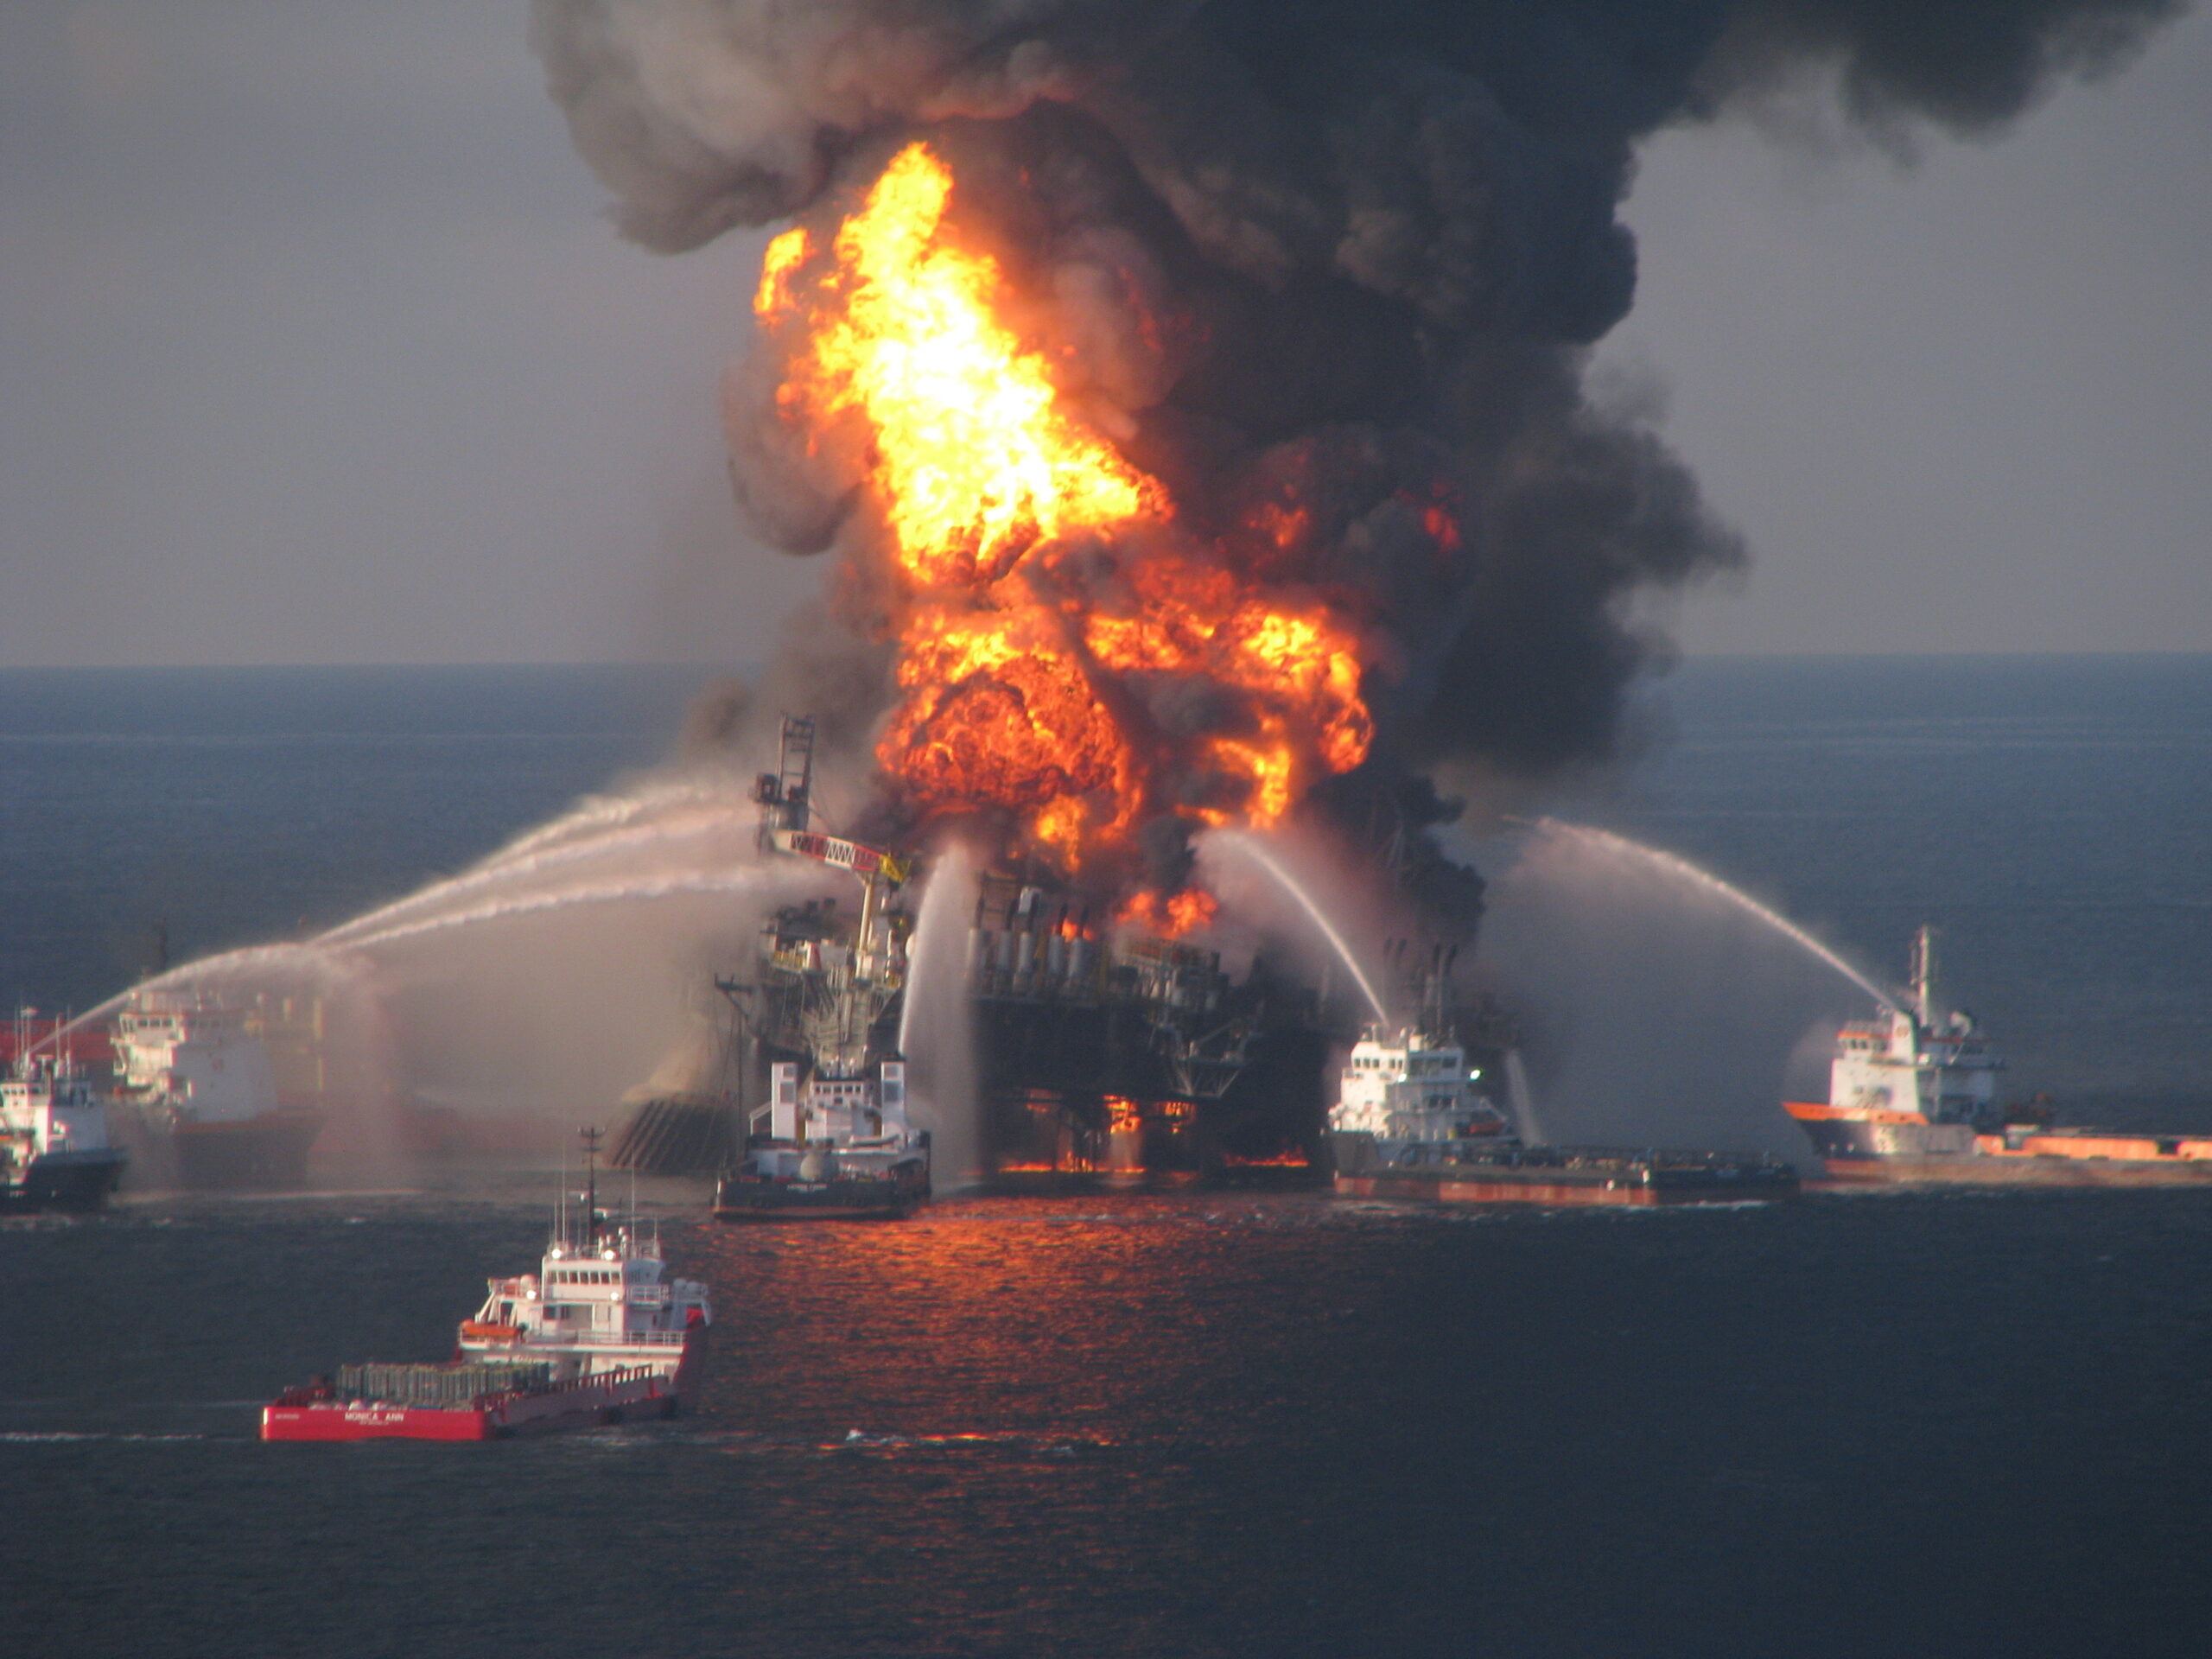 Deepwater Horizon drilling rig, April 21, 2010. Photo courtesy U.S. Coast Guard. The appearance of U.S. Department of Defense (DoD) visual information does not imply or constitute DoD endorsement.